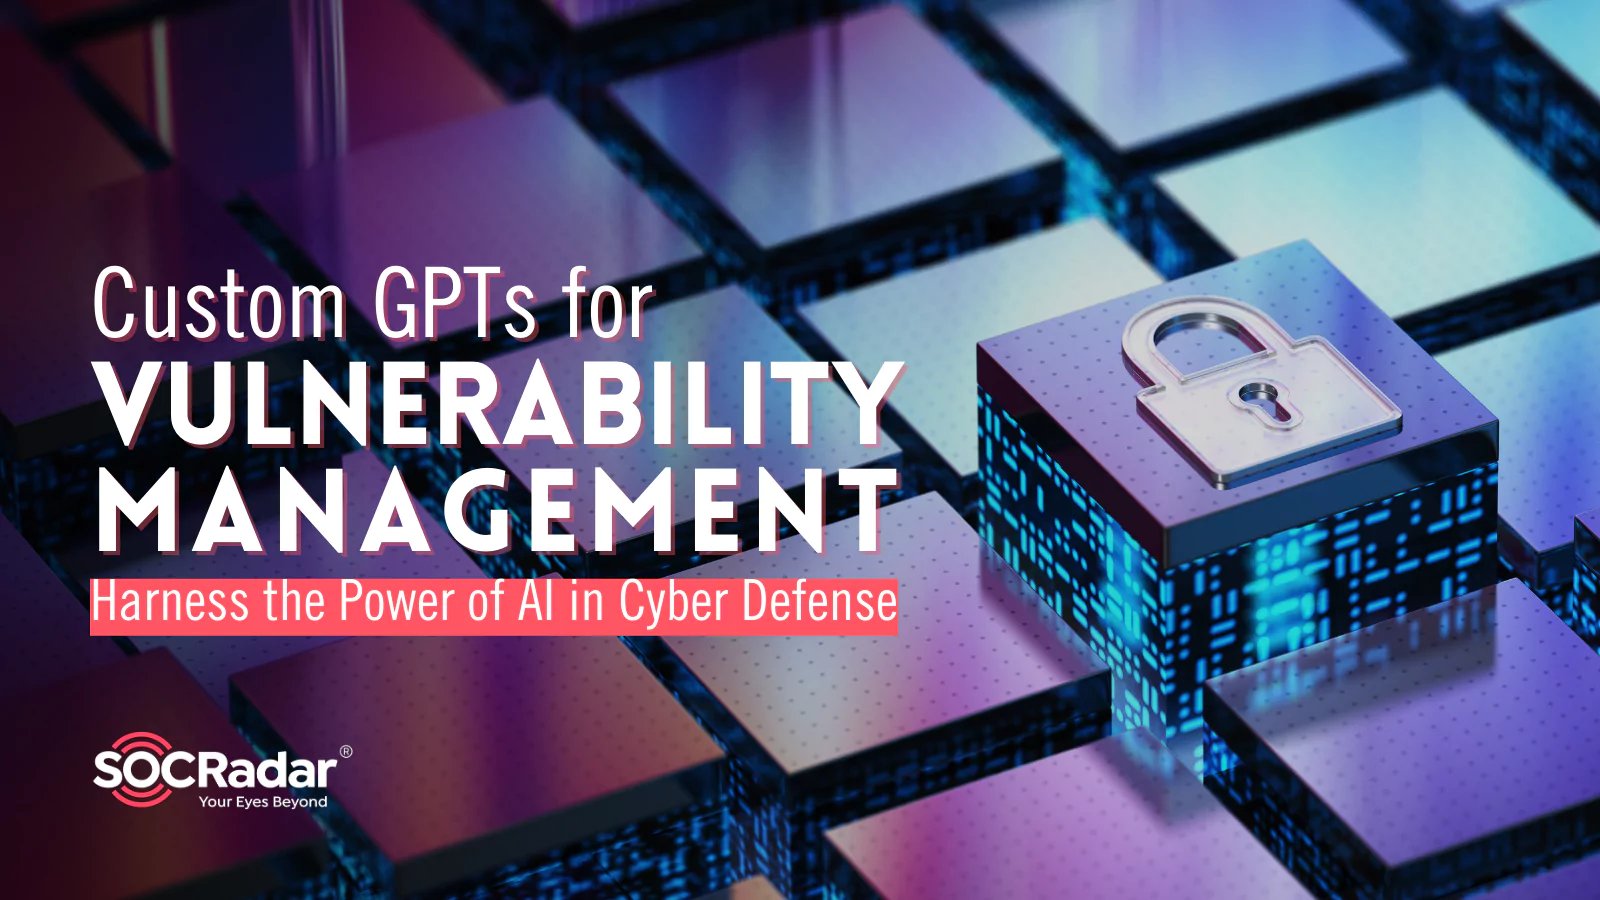 SOCRadar® Cyber Intelligence Inc. | Custom GPTs for Vulnerability Management: Harness the Power of AI in Cyber Defense